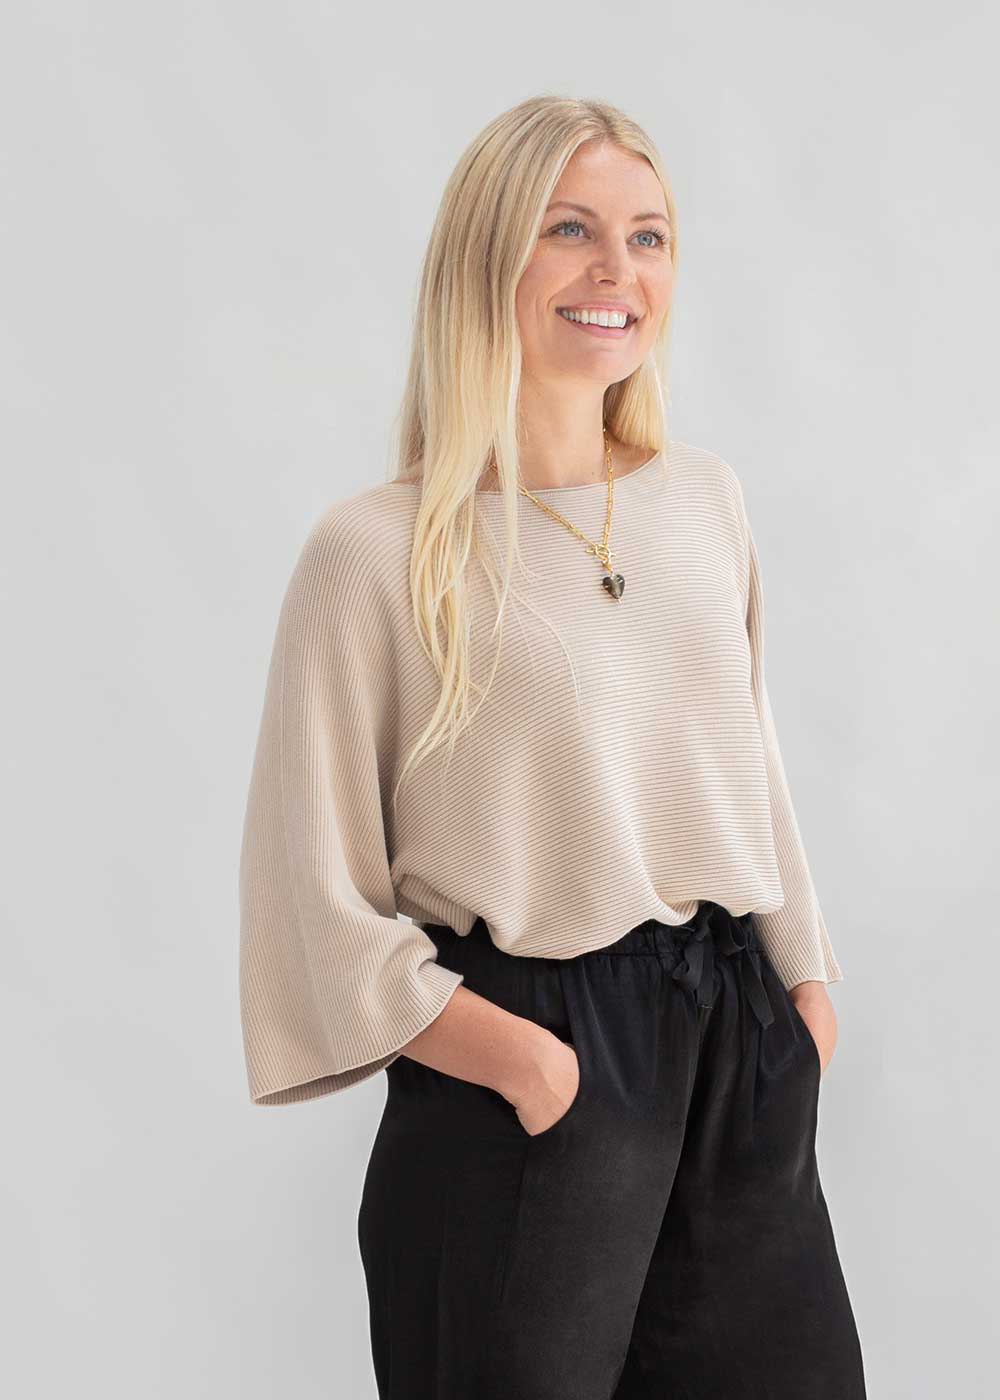 A model wearing a slouchy beige knitted sweater and black trousers